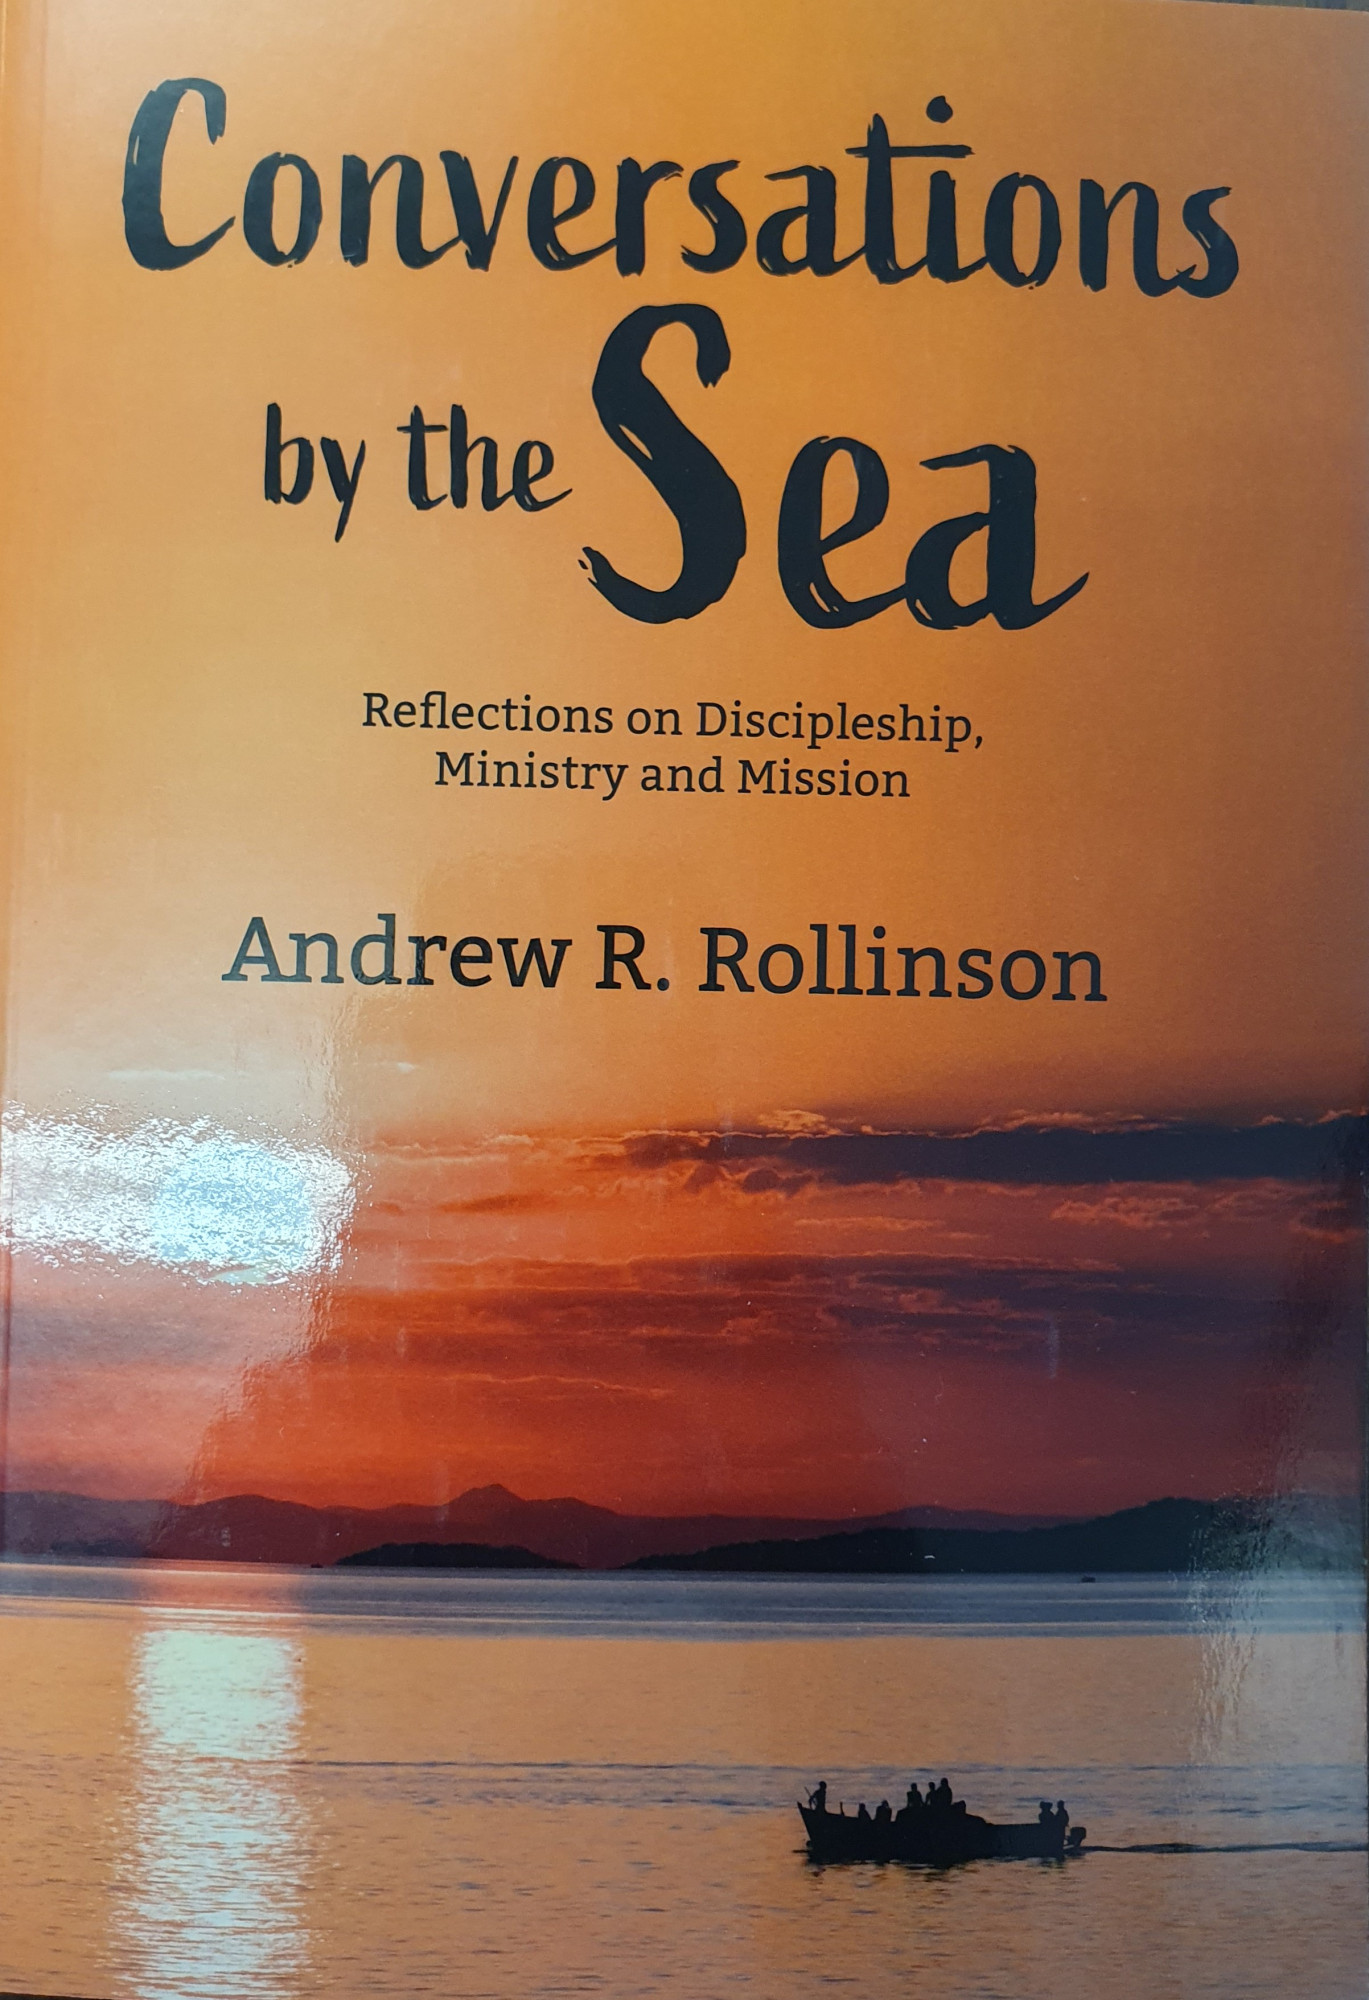 CONVERSATIONS BY THE SEA: Reflections on Discipleship, Ministry and Mission